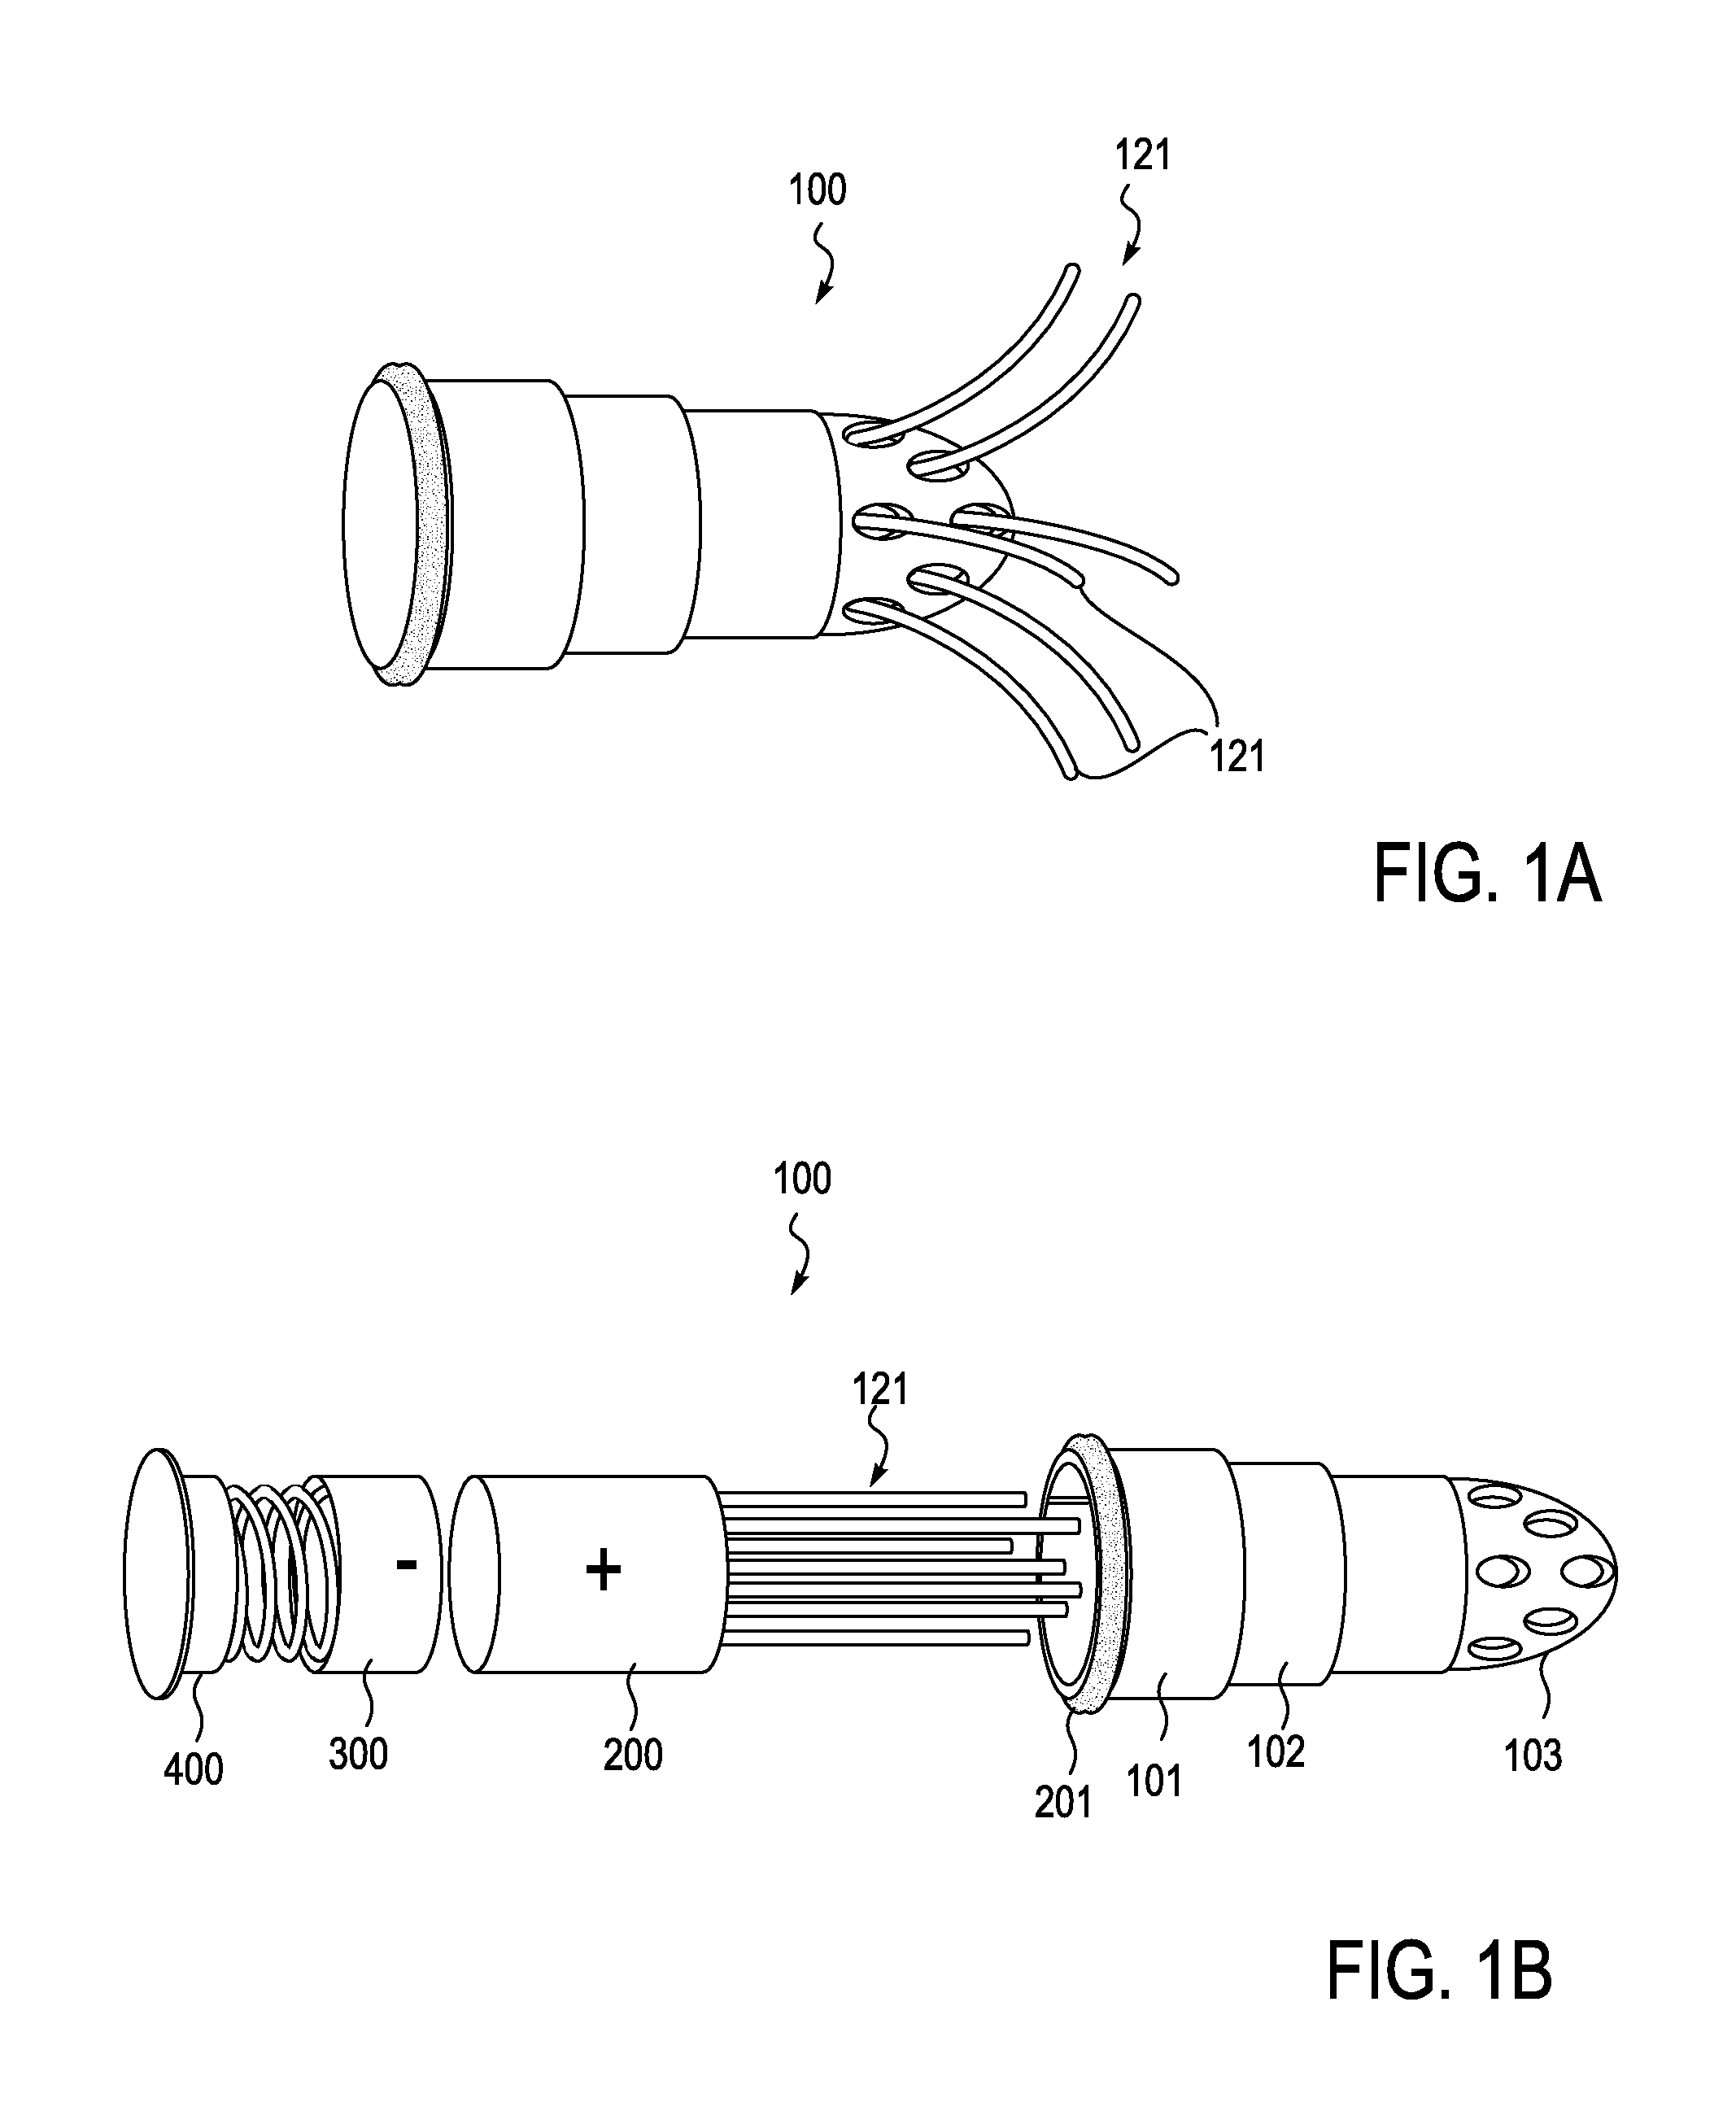 Bone implants for the treatment of infection